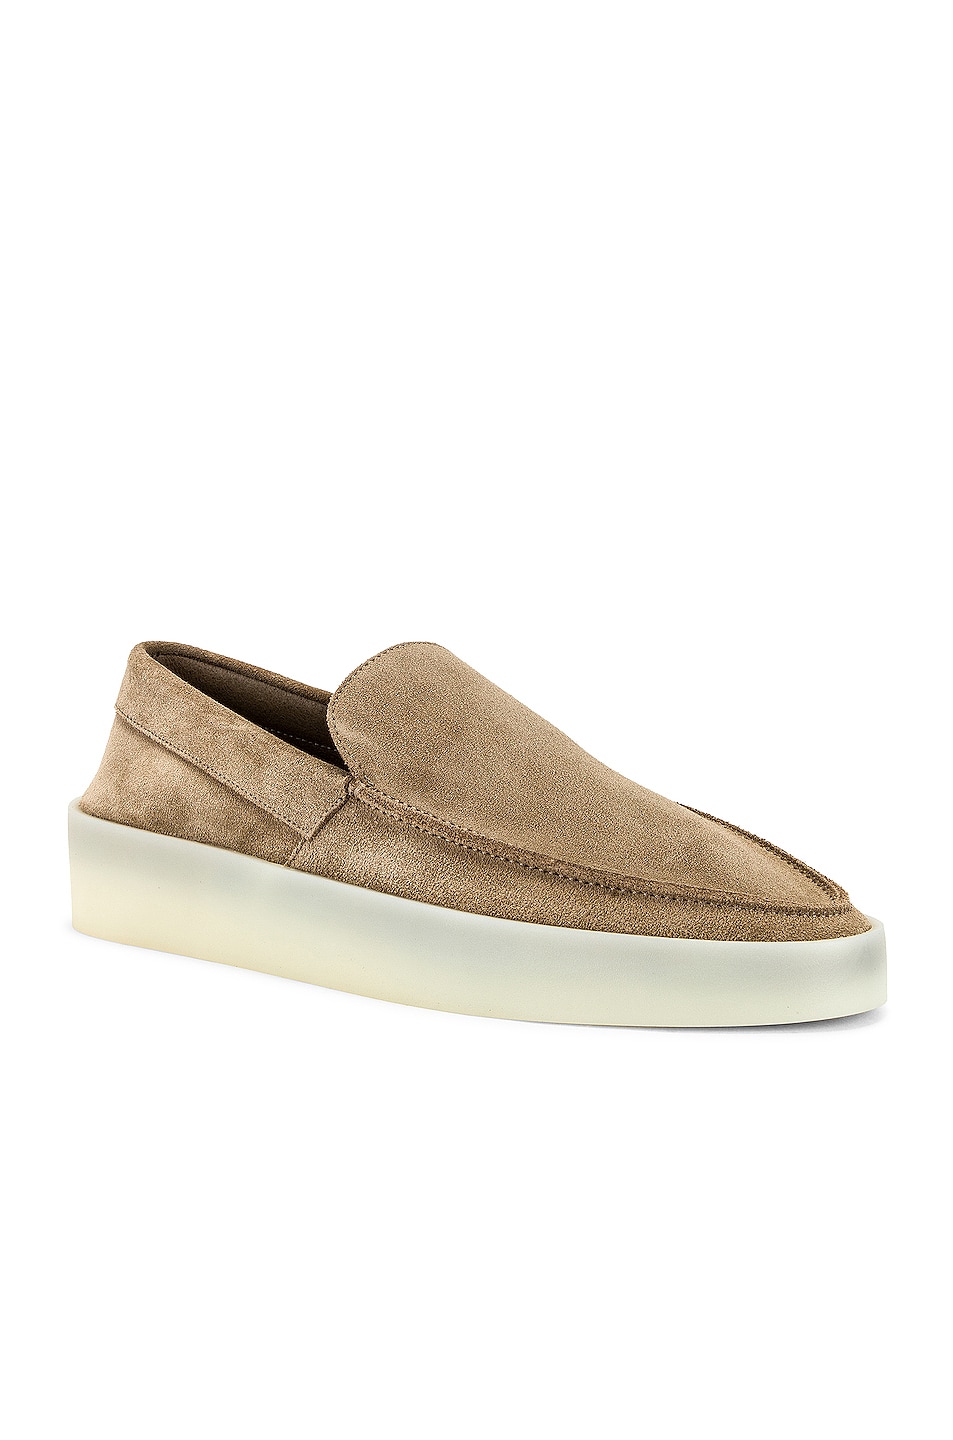 Fear of God The Loafer in Daino | FWRD